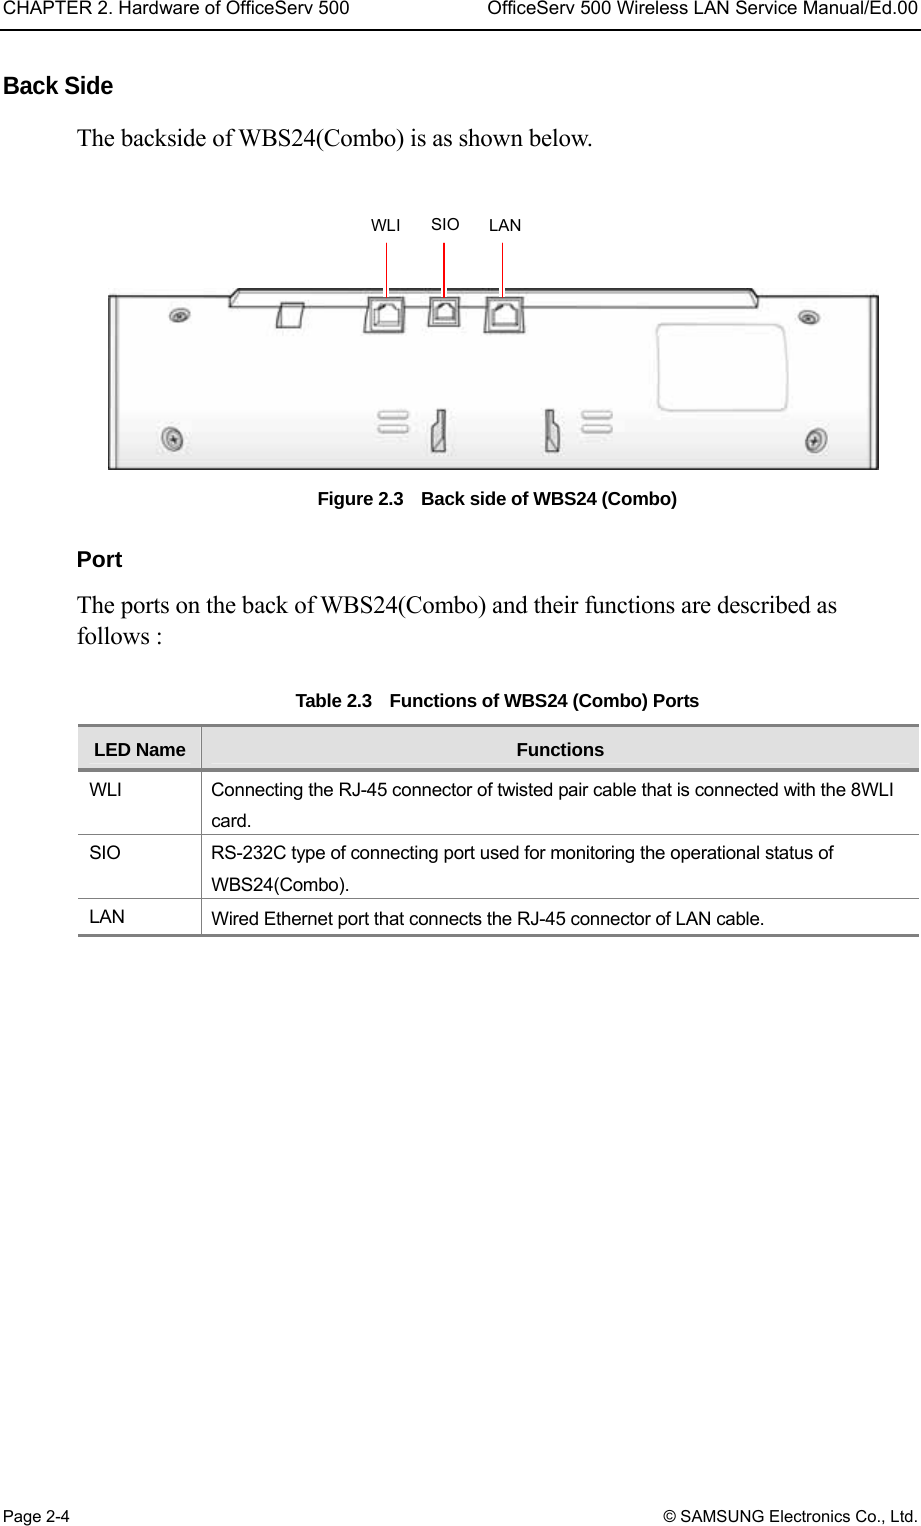 CHAPTER 2. Hardware of OfficeServ 500  OfficeServ 500 Wireless LAN Service Manual/Ed.00 Page 2-4 © SAMSUNG Electronics Co., Ltd. Back Side   The backside of WBS24(Combo) is as shown below.    Figure 2.3    Back side of WBS24 (Combo)    Port The ports on the back of WBS24(Combo) and their functions are described as follows :  Table 2.3    Functions of WBS24 (Combo) Ports LED Name  Functions WLI  Connecting the RJ-45 connector of twisted pair cable that is connected with the 8WLI card.  SIO  RS-232C type of connecting port used for monitoring the operational status of WBS24(Combo).  LAN  Wired Ethernet port that connects the RJ-45 connector of LAN cable.   WLI SIO LAN